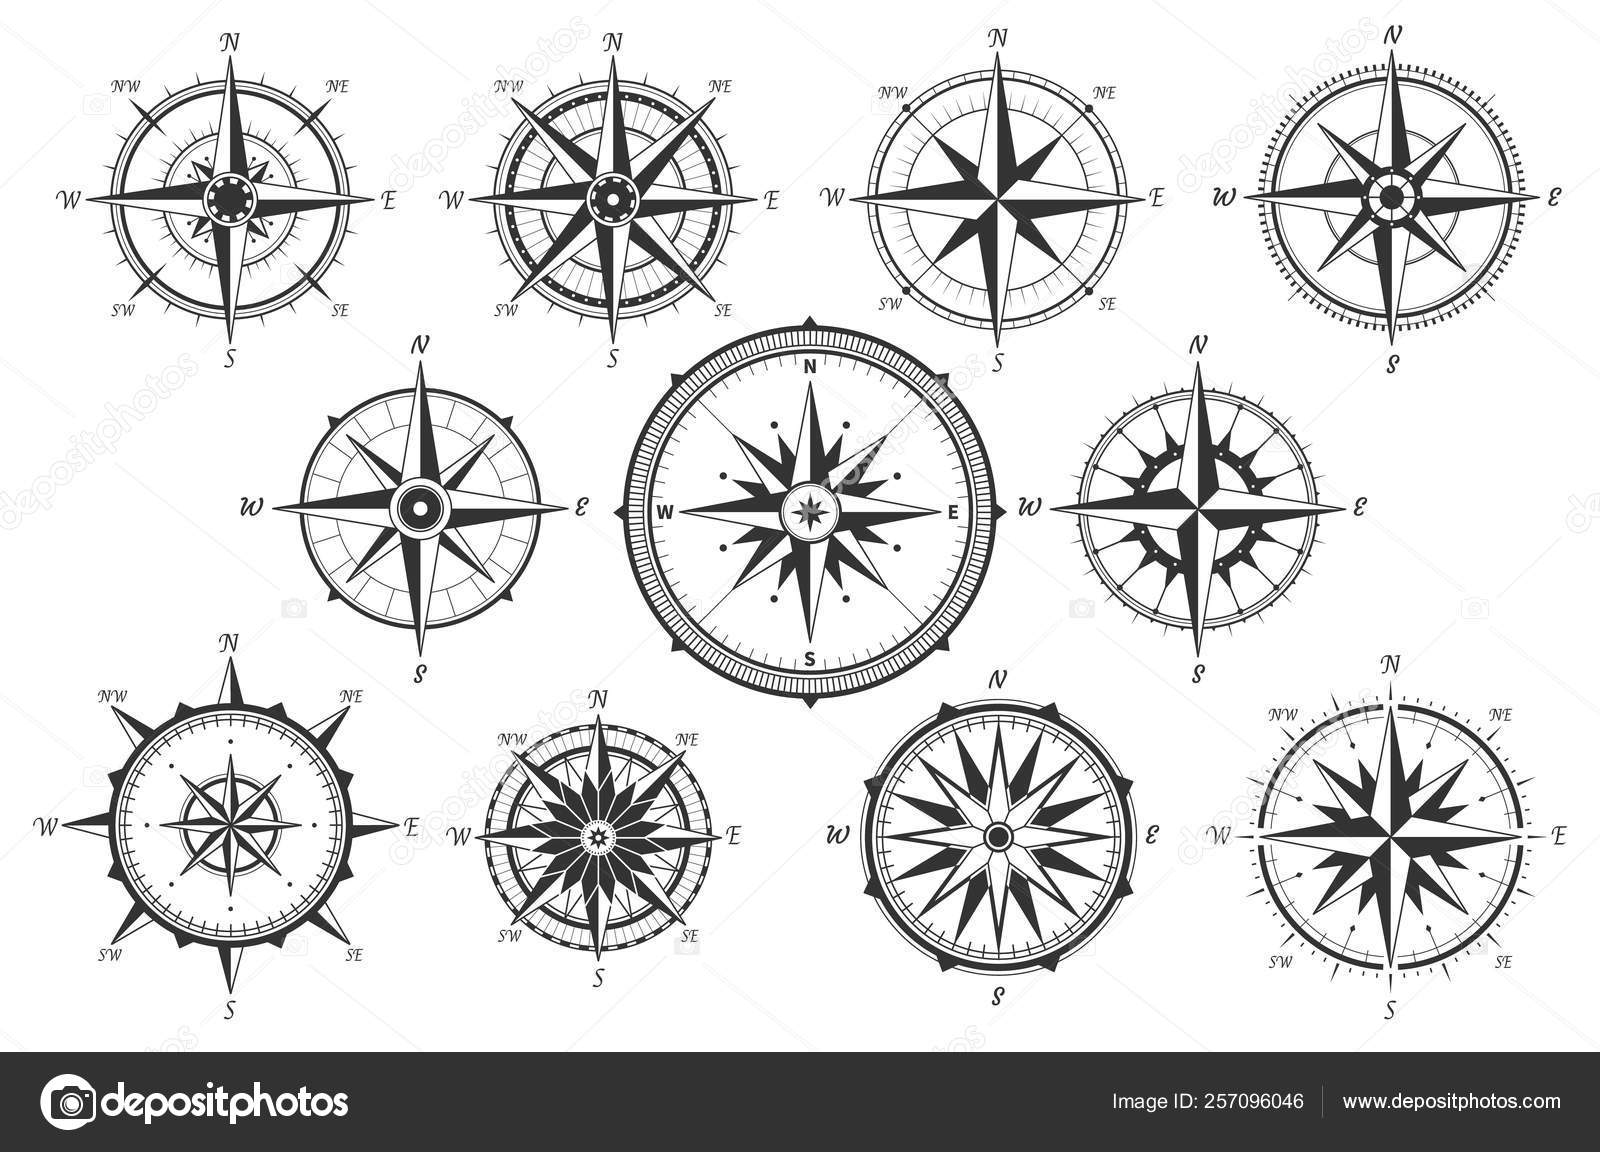 Compass icon wind map north west Royalty Free Vector Image